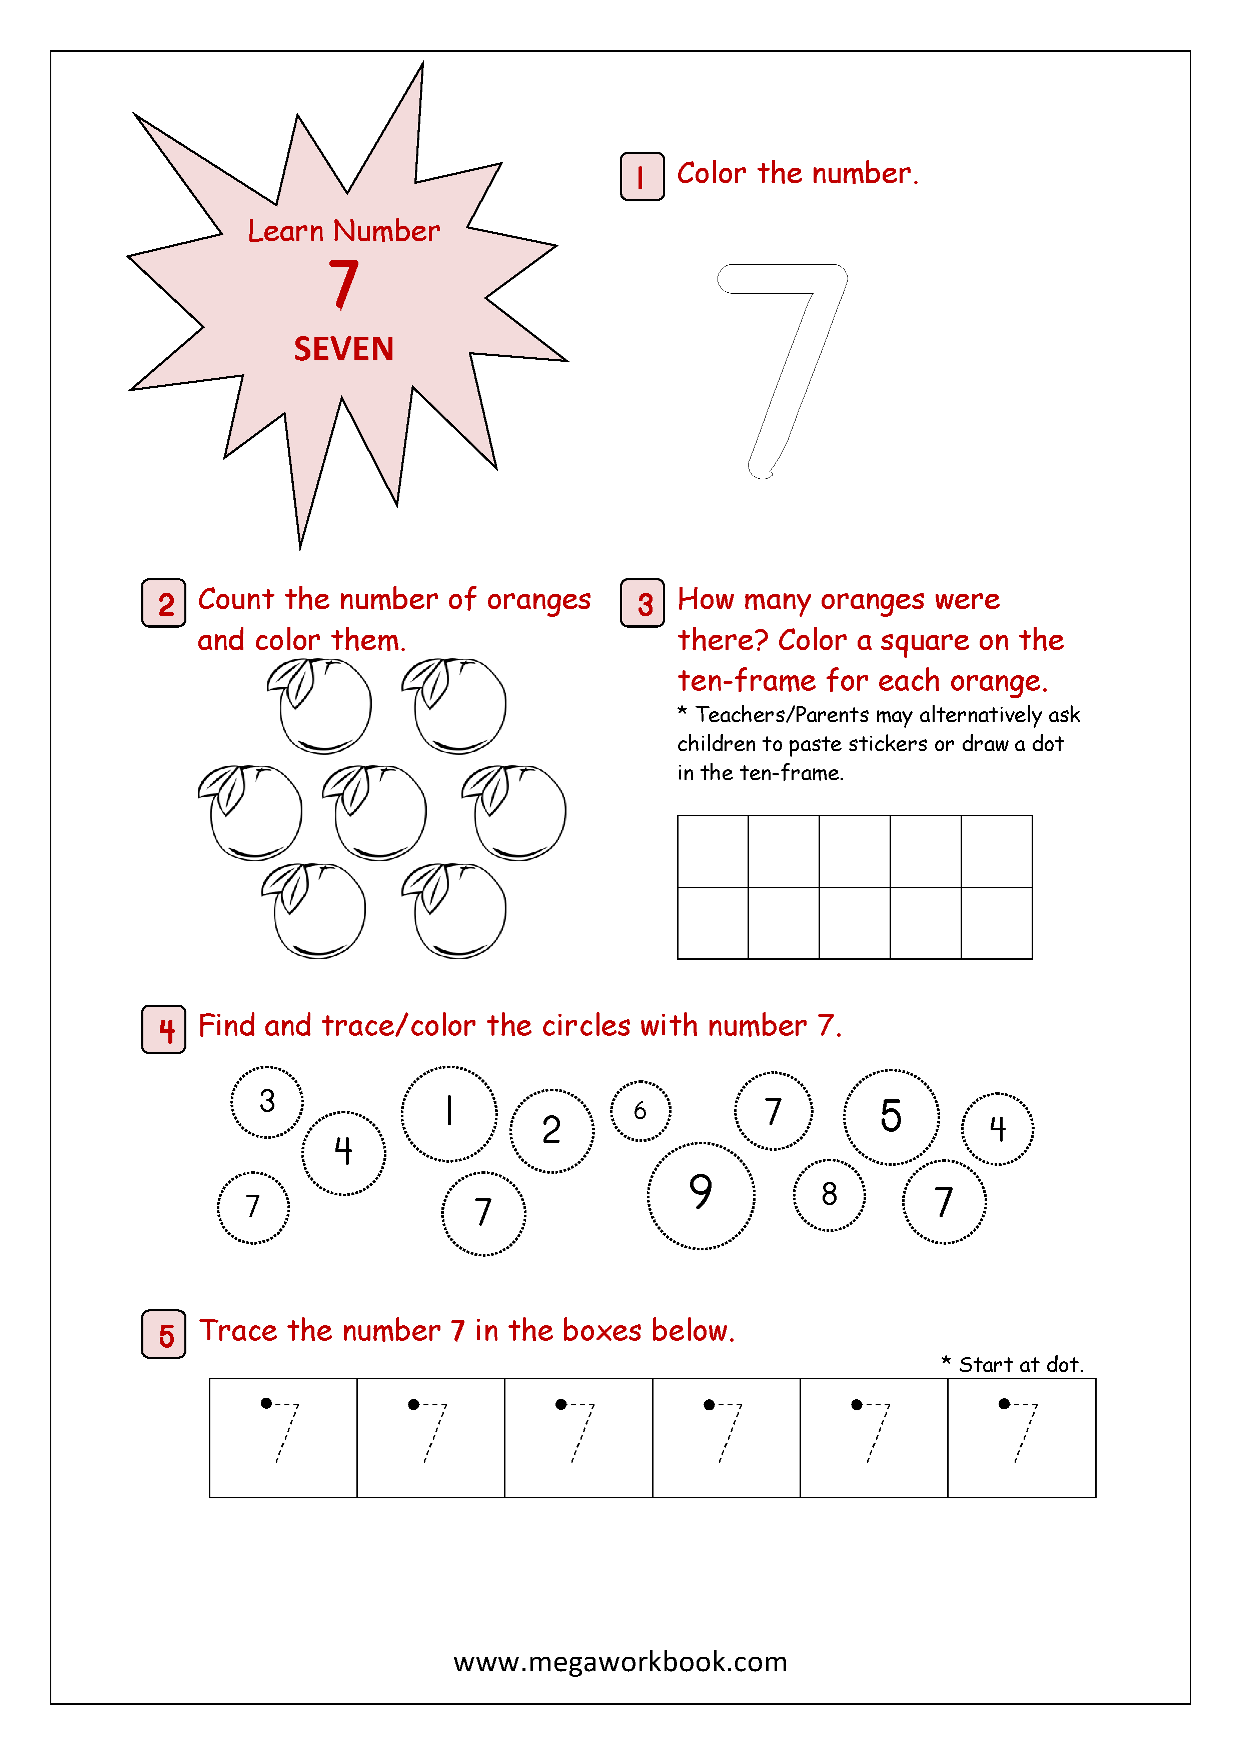 Free Printable Number Recognition (1 to 10) Activity Sheets, Number